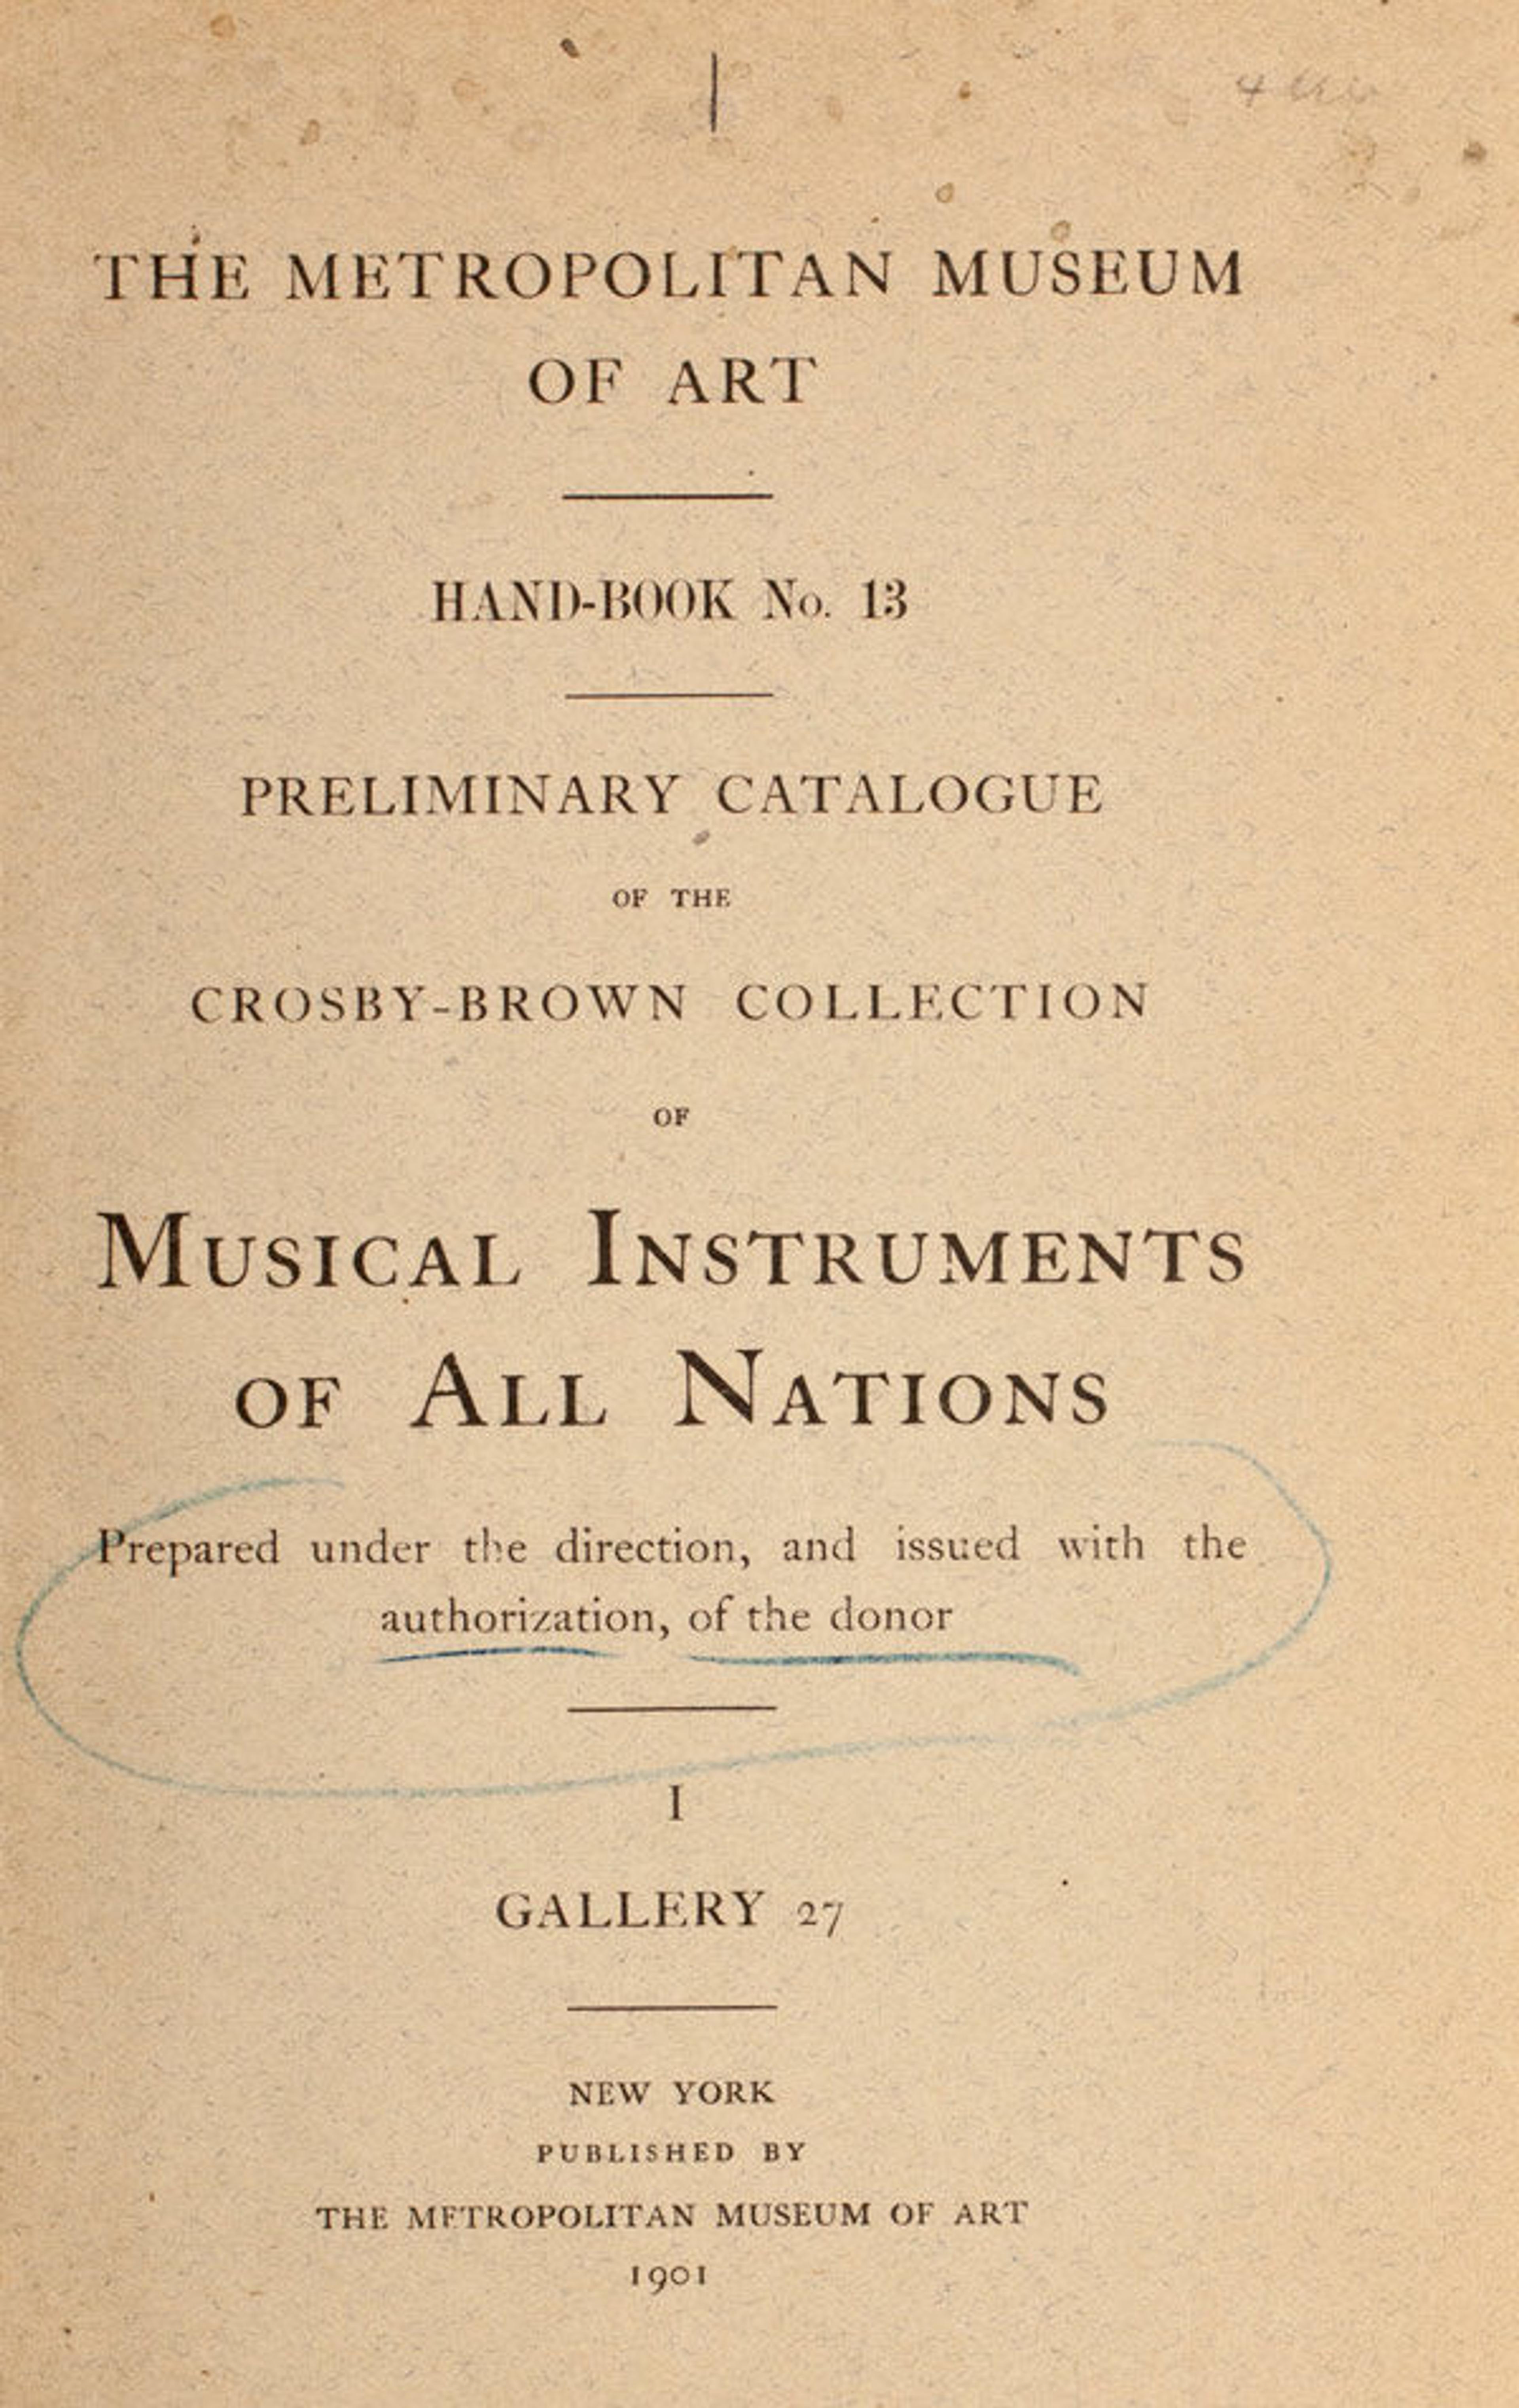 Title page from "Preliminary Catalogue of the Crosby-Brown Collection of Musical Instruments of All Nations: [Volume] I, Gallery 27"